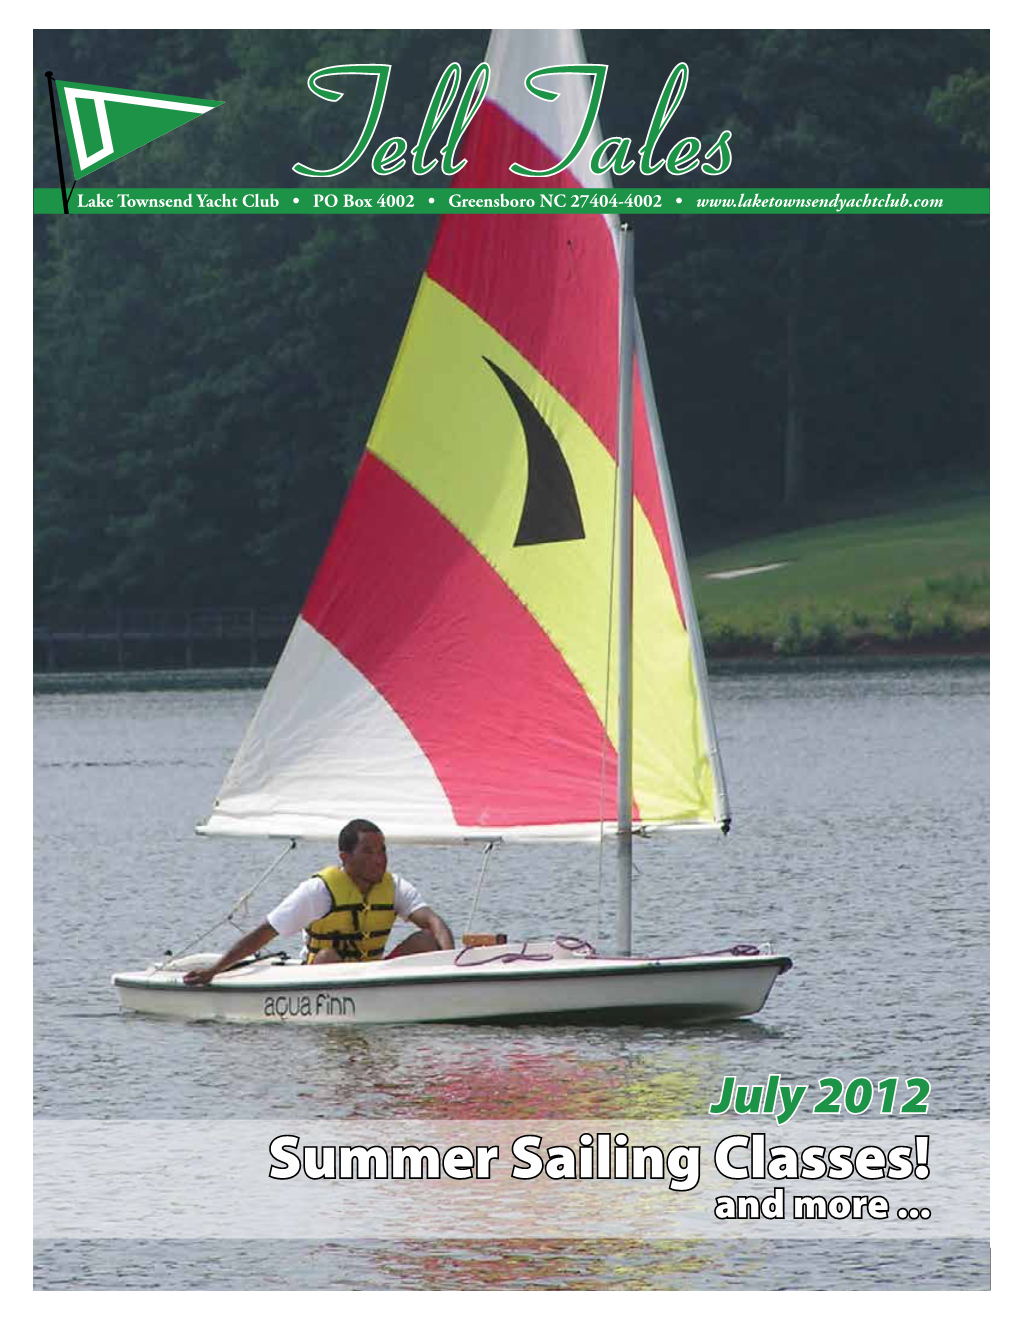 July 2012 Summer Sailing Classes! and More